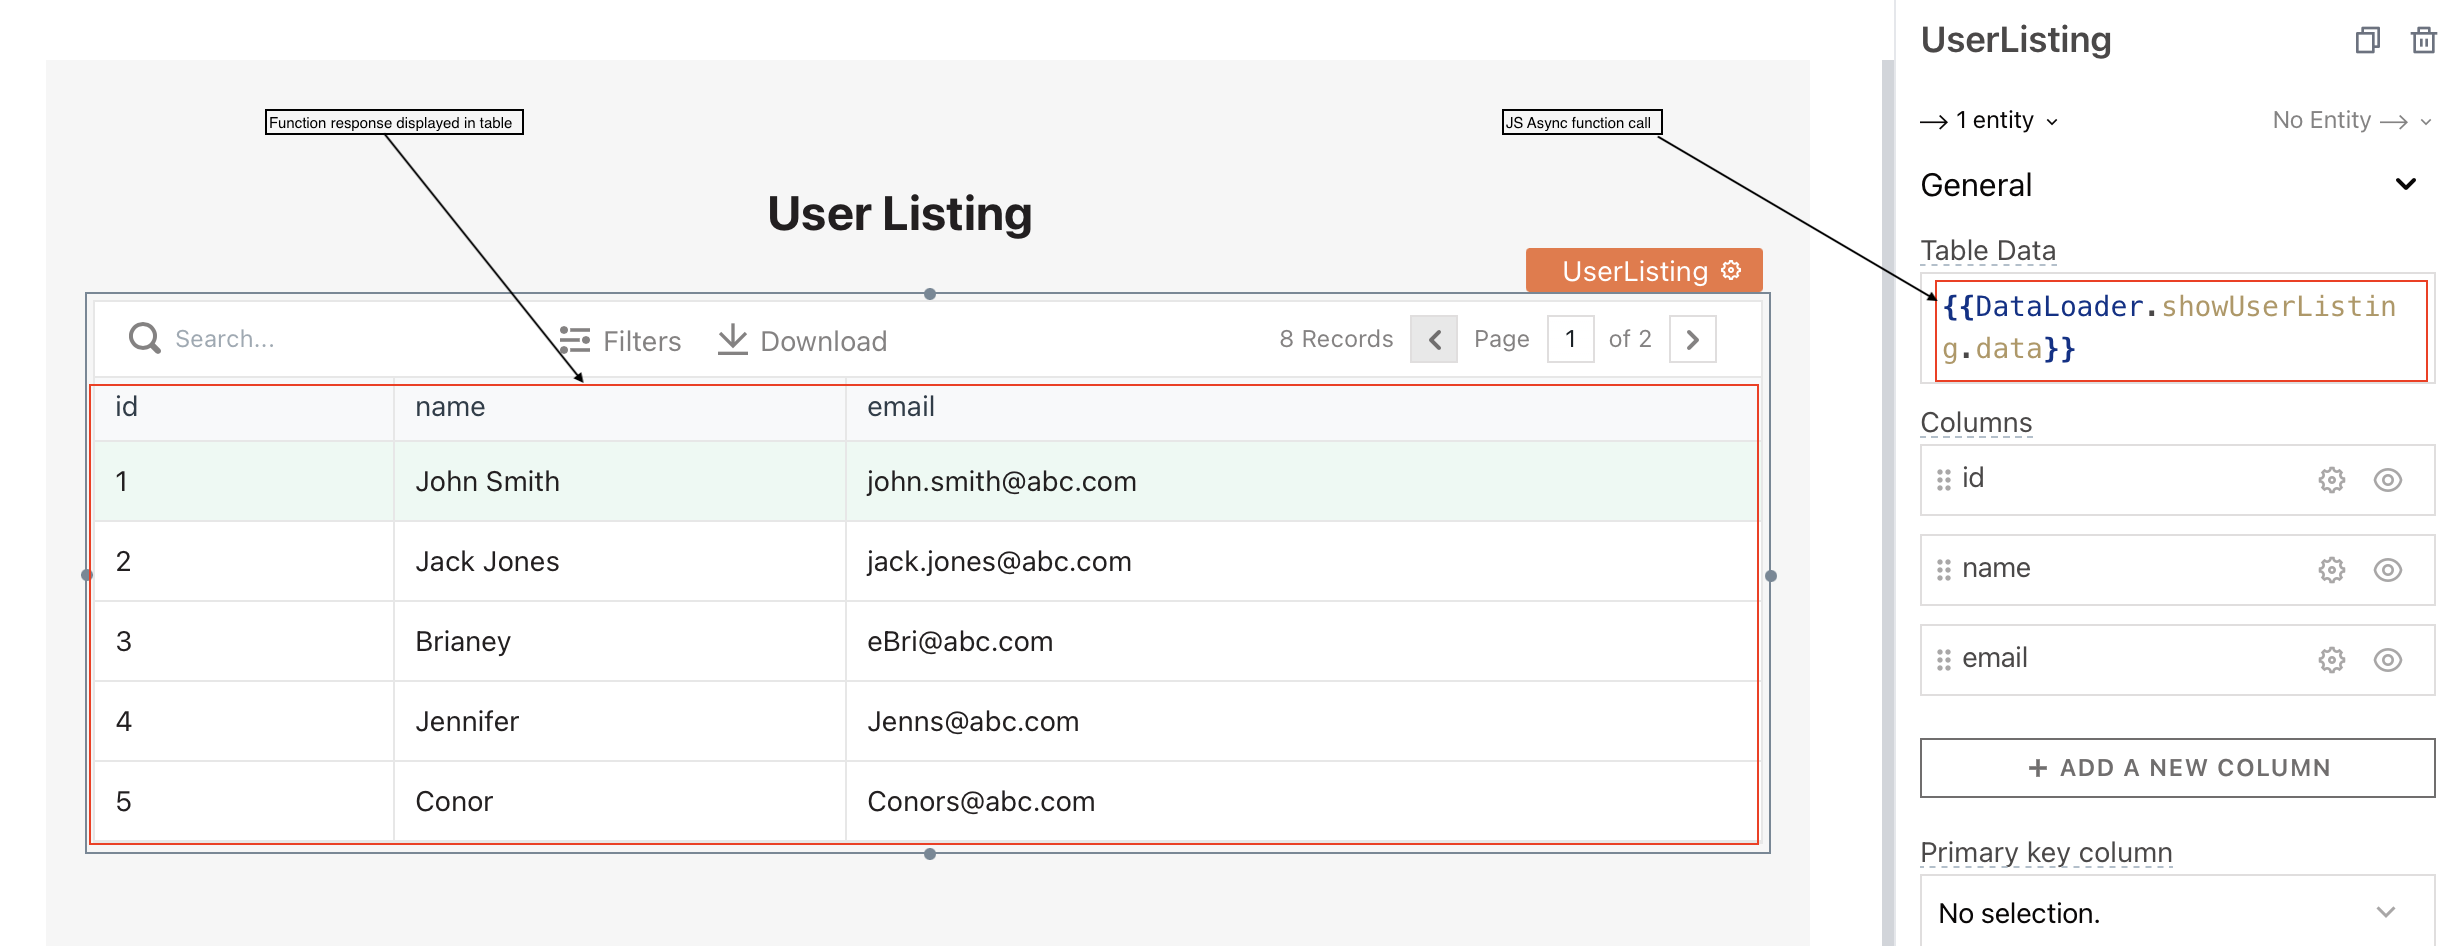 The user listing is displayed to logged-in appsmith users